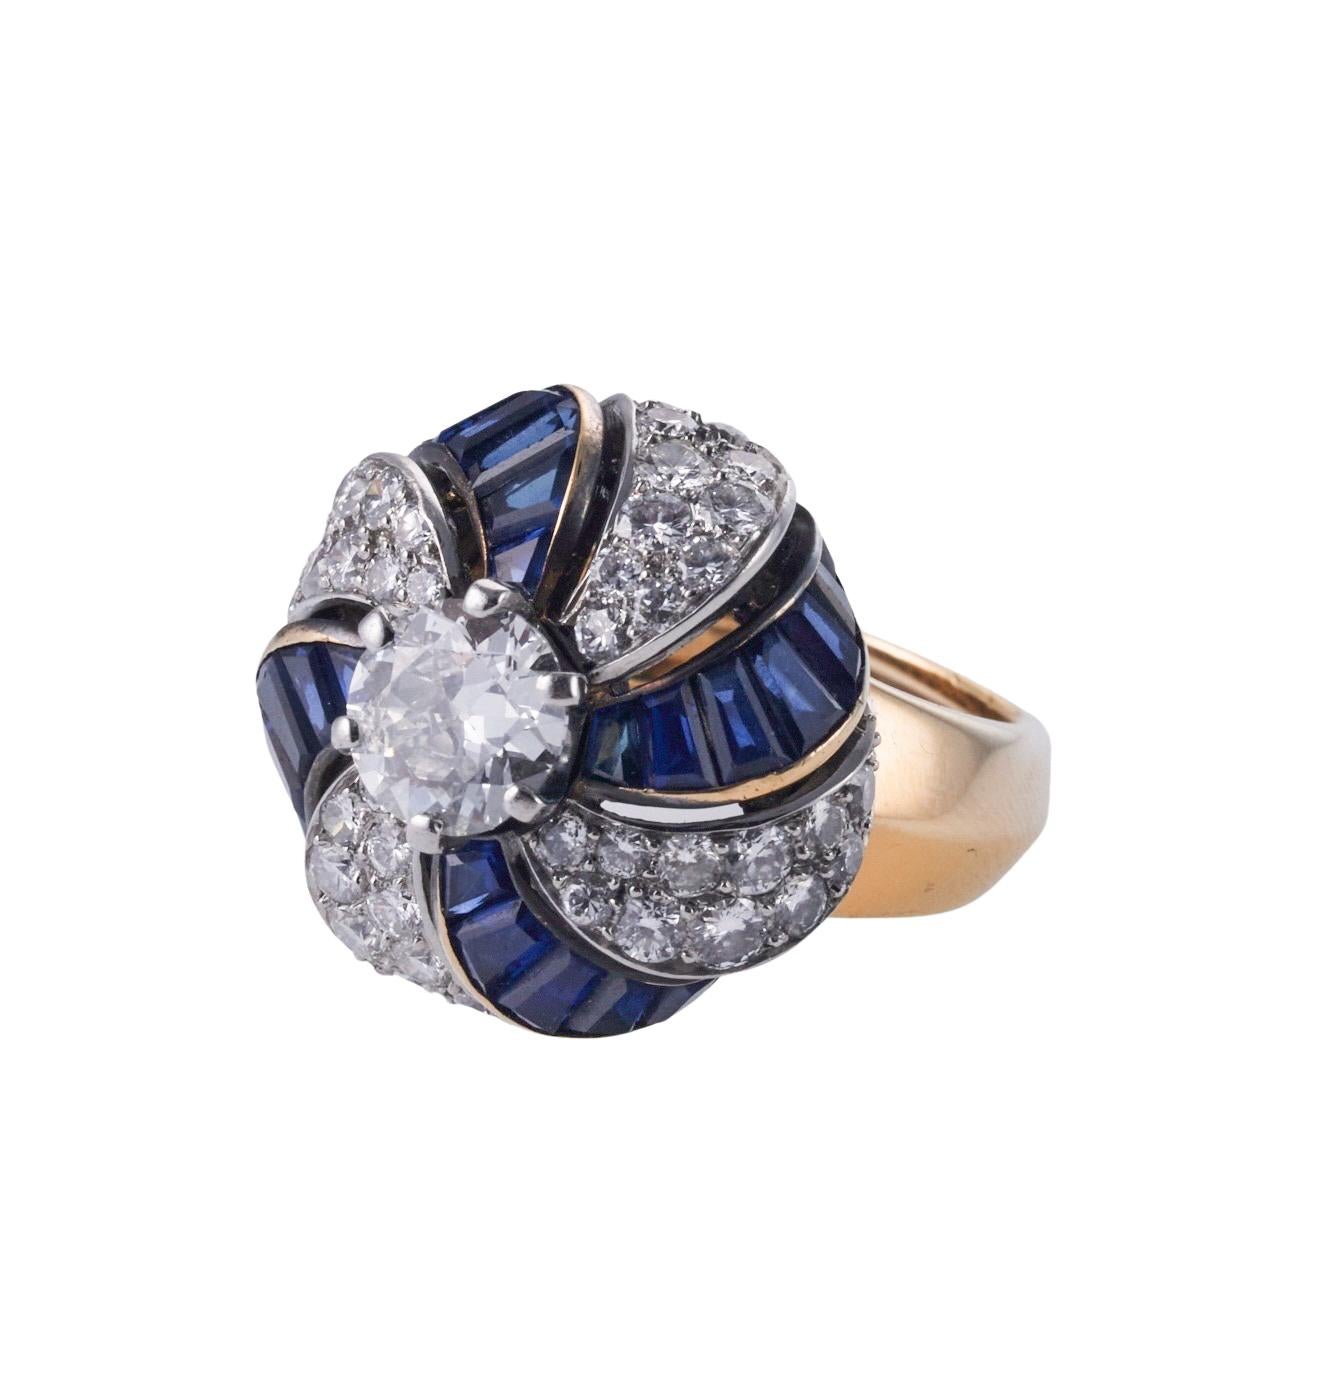 Round Cut Van Cleef & Arpels Sapphire Diamond Gold Cocktail Ring For Sale